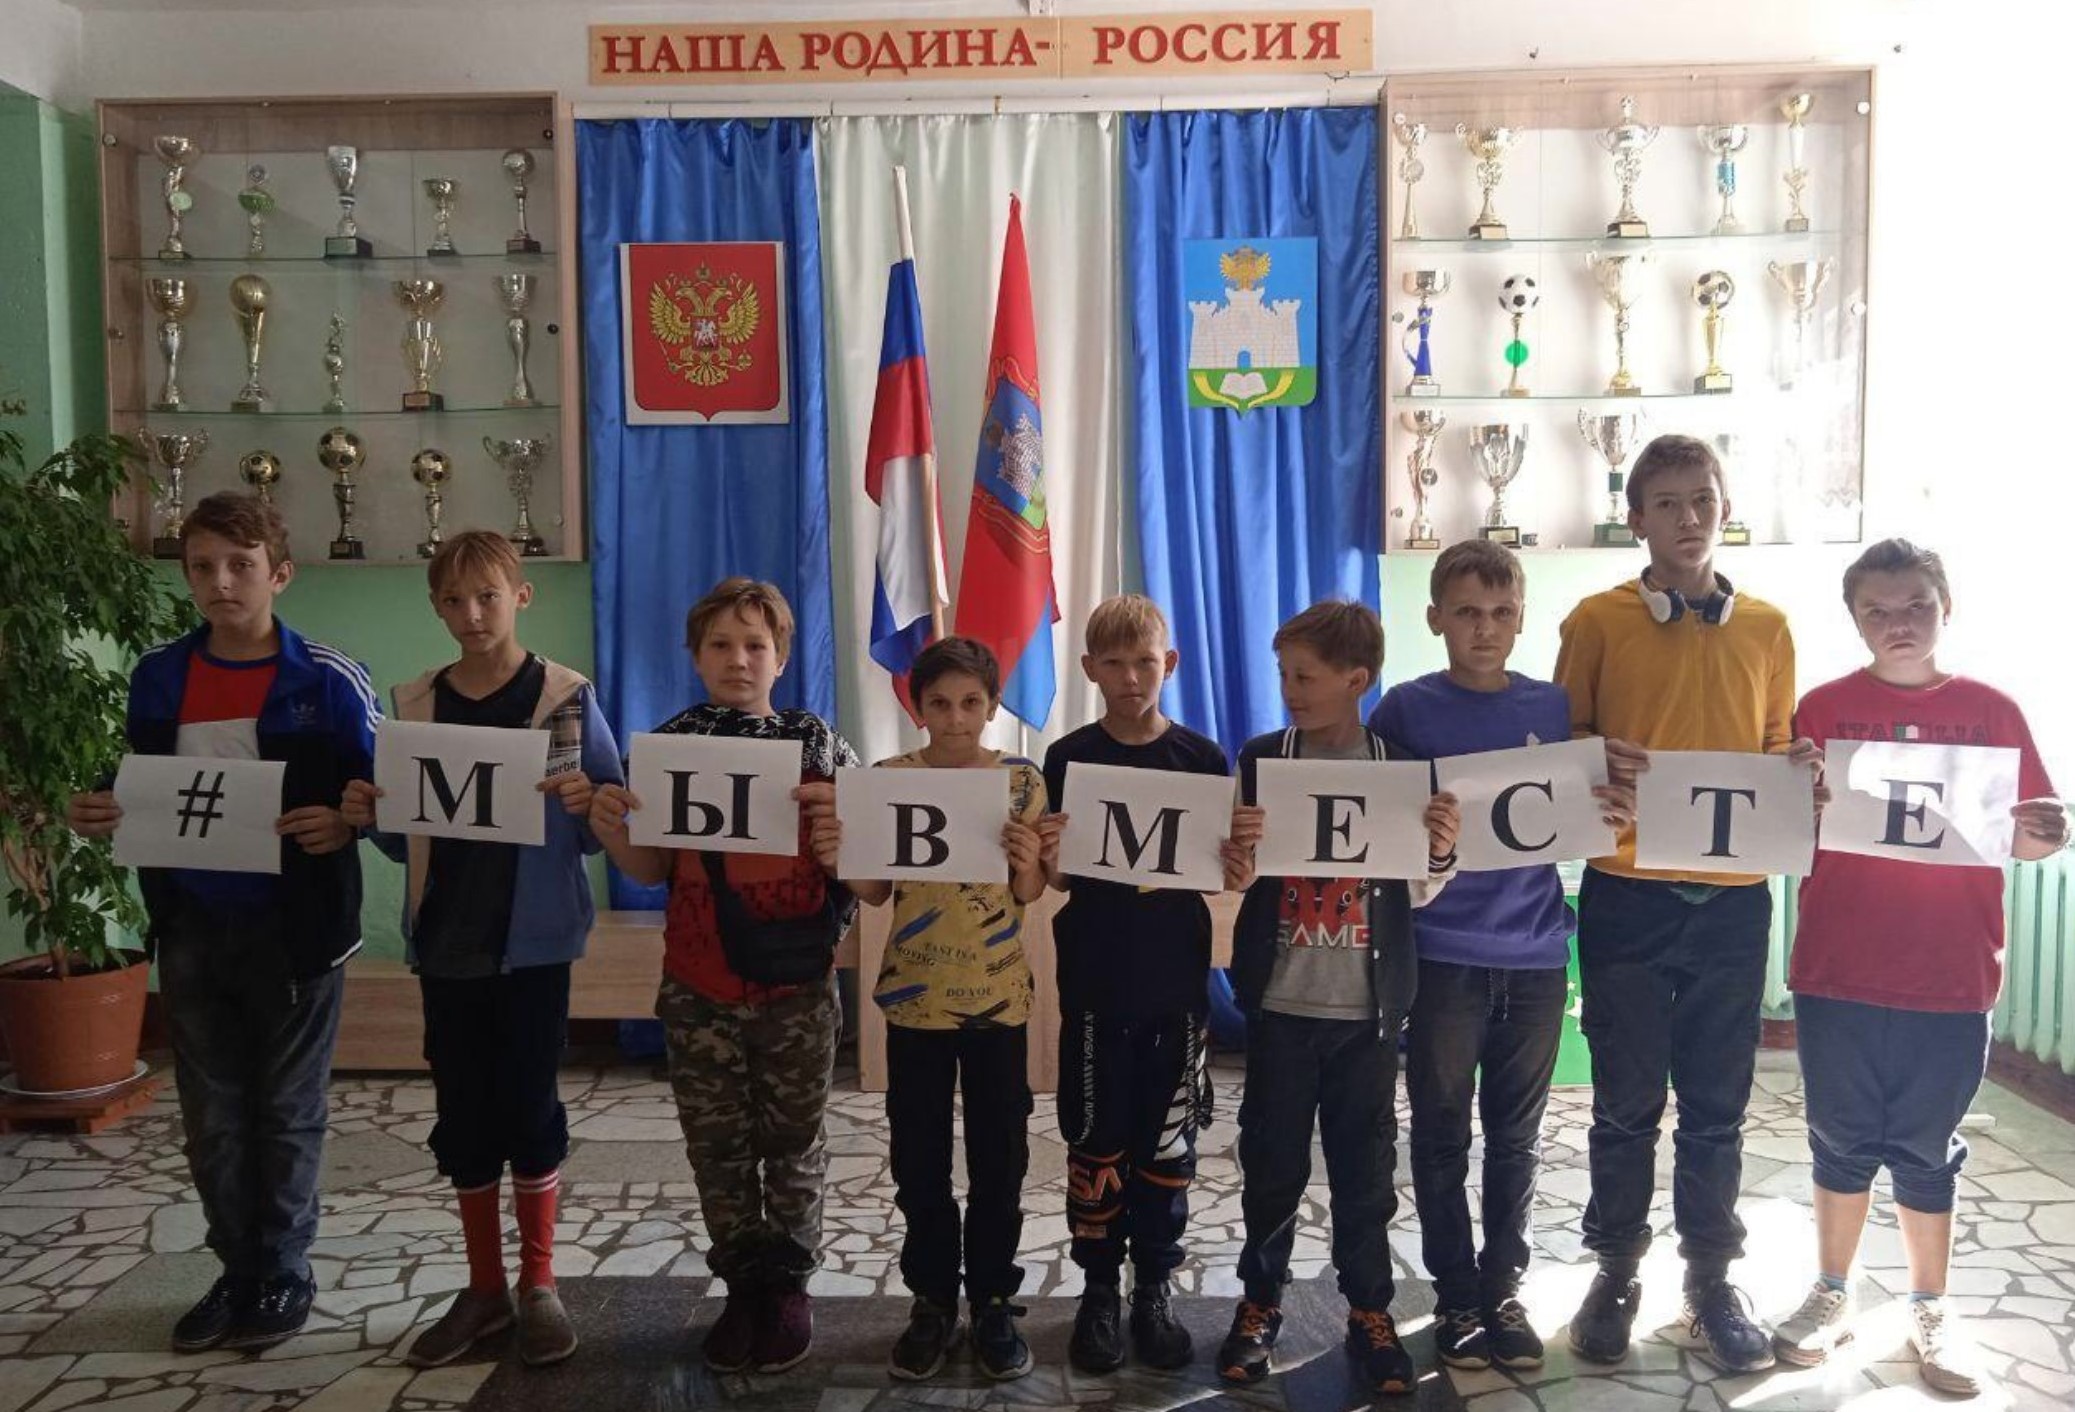 Children at a Russian school orphanage, likely including those forcibly abducted from Ukraine, holding the pro-war slogan (we’re together) and under a sign claiming that ’Russia is our motherland’